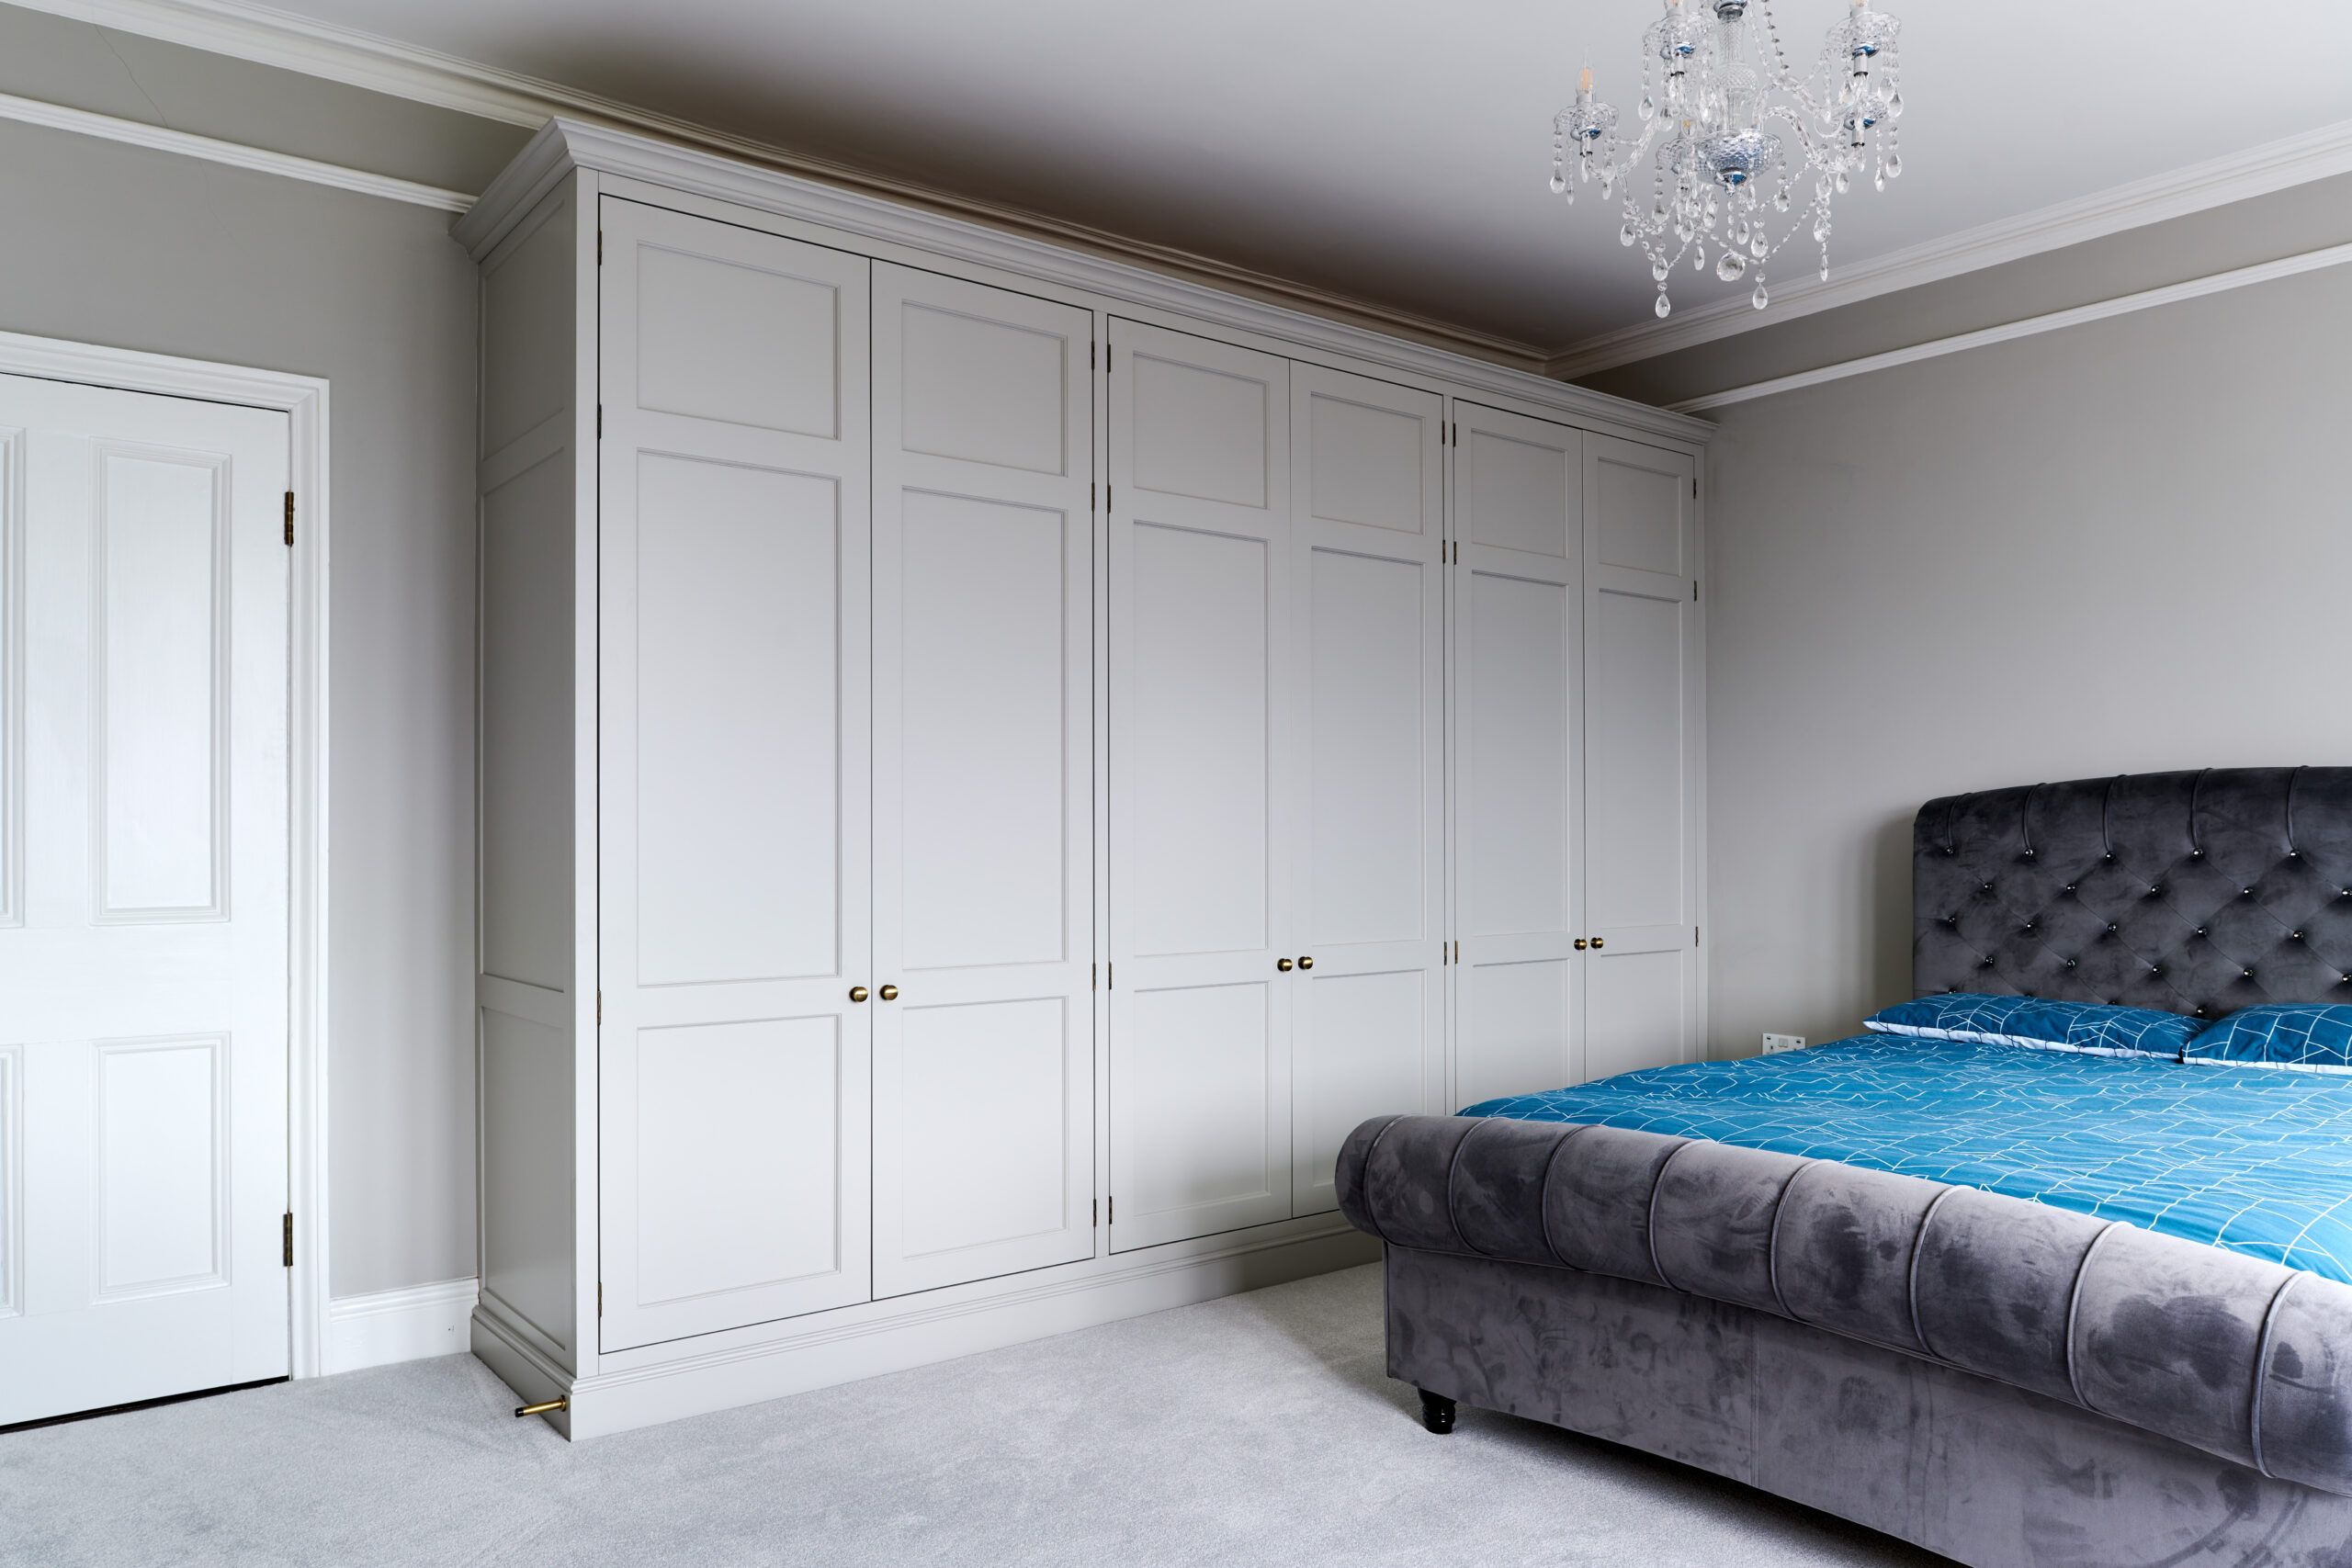 Fitted Or Freestanding Bespoke Wardrobes | Bath Bespoke With Built In Wardrobes (View 6 of 15)